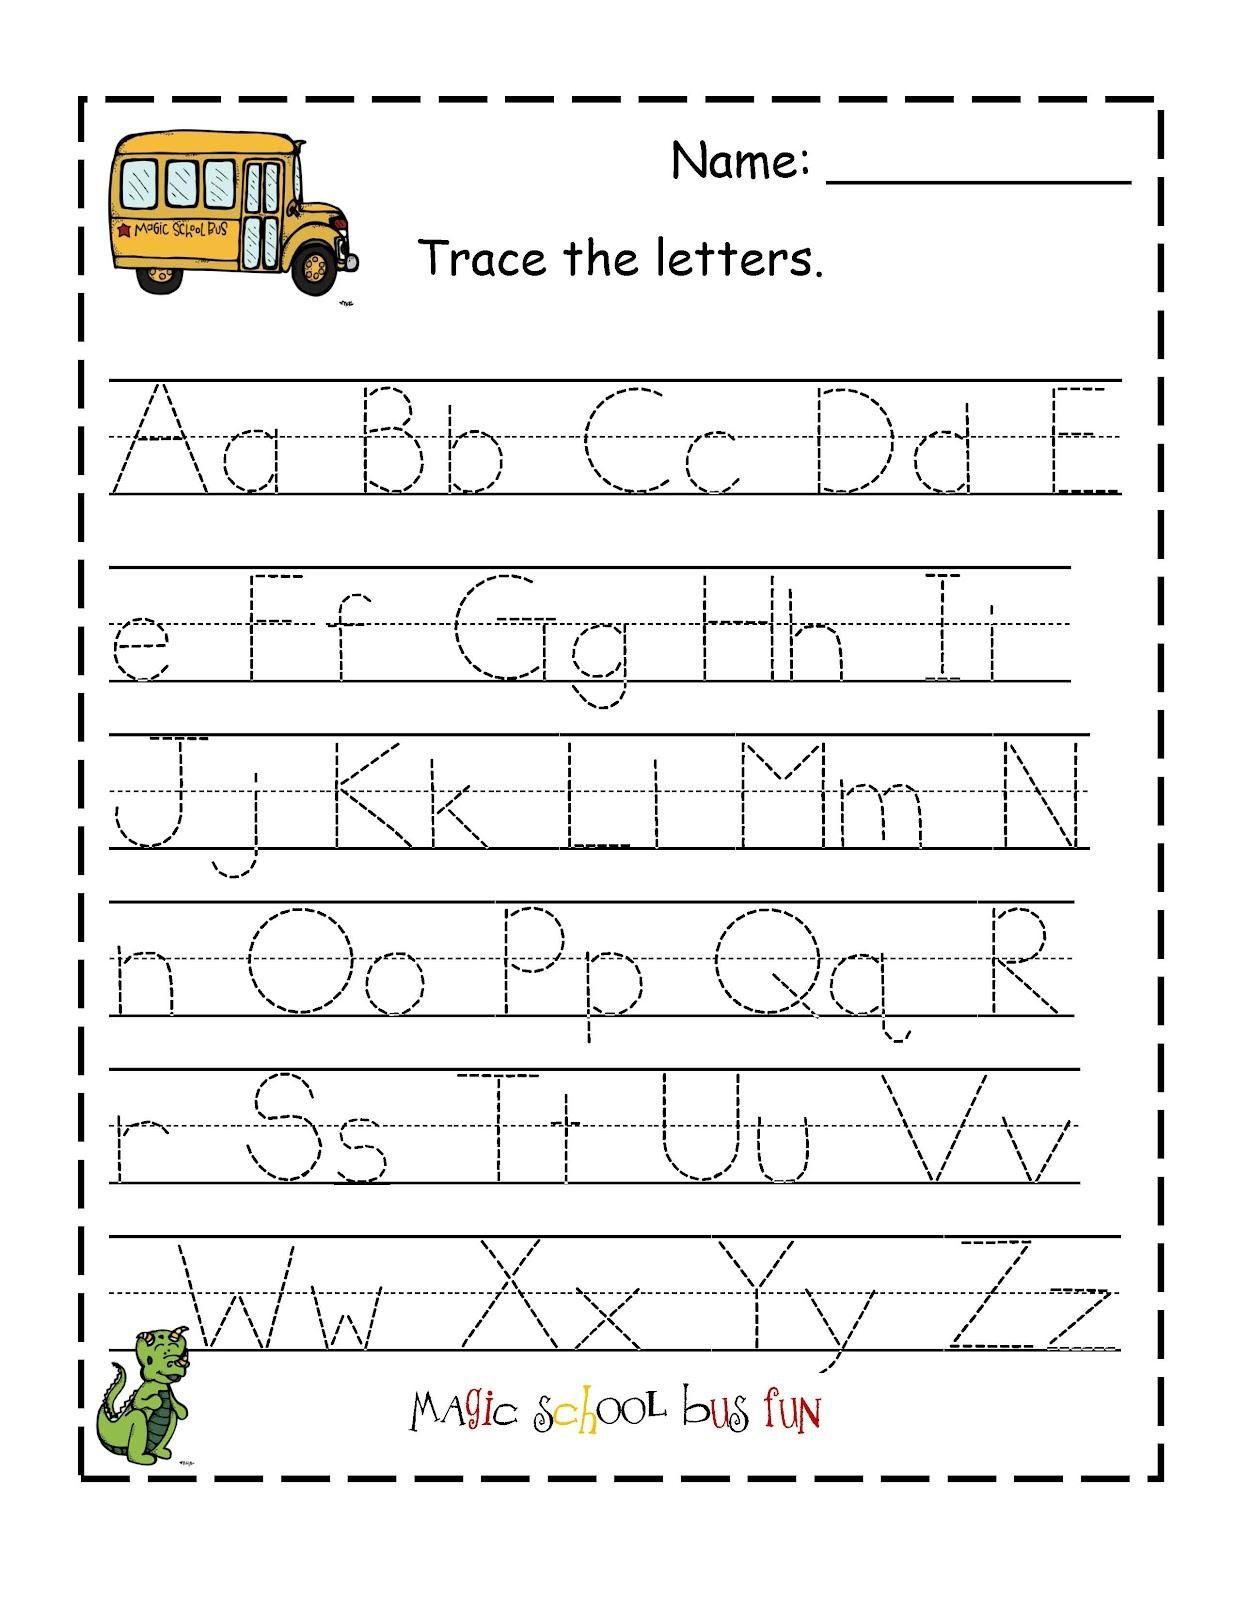 Coloring Book : Printable Letter Tracing Sheets For intended for Tracing Alphabet Letters Worksheets Pdf